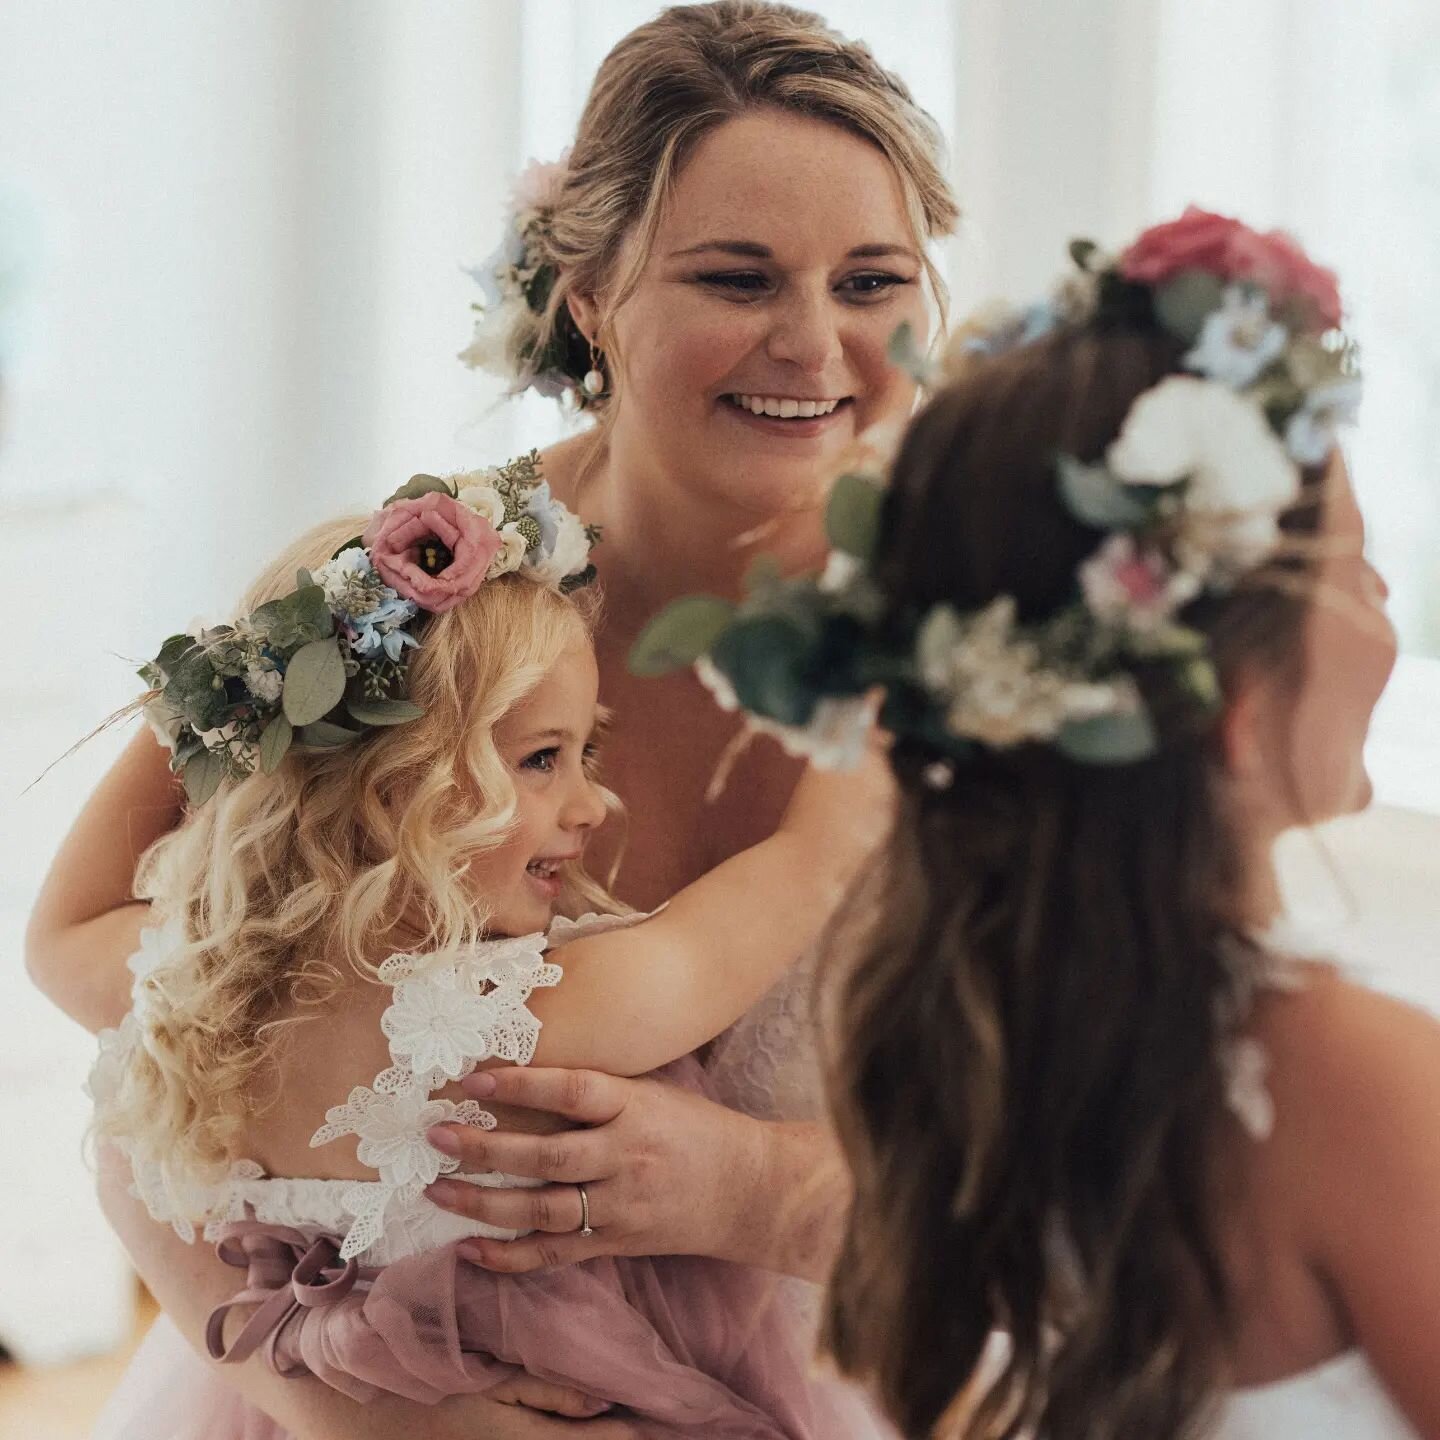 Flower crowns and combs...
I am fully aware that I'm a bit partial, but I just love flowers in hair so much. If it's a full crown, a few loose blooms, or a comb like Nicole had, it's so special.
It's such a fun accent that, expecially if you're not w